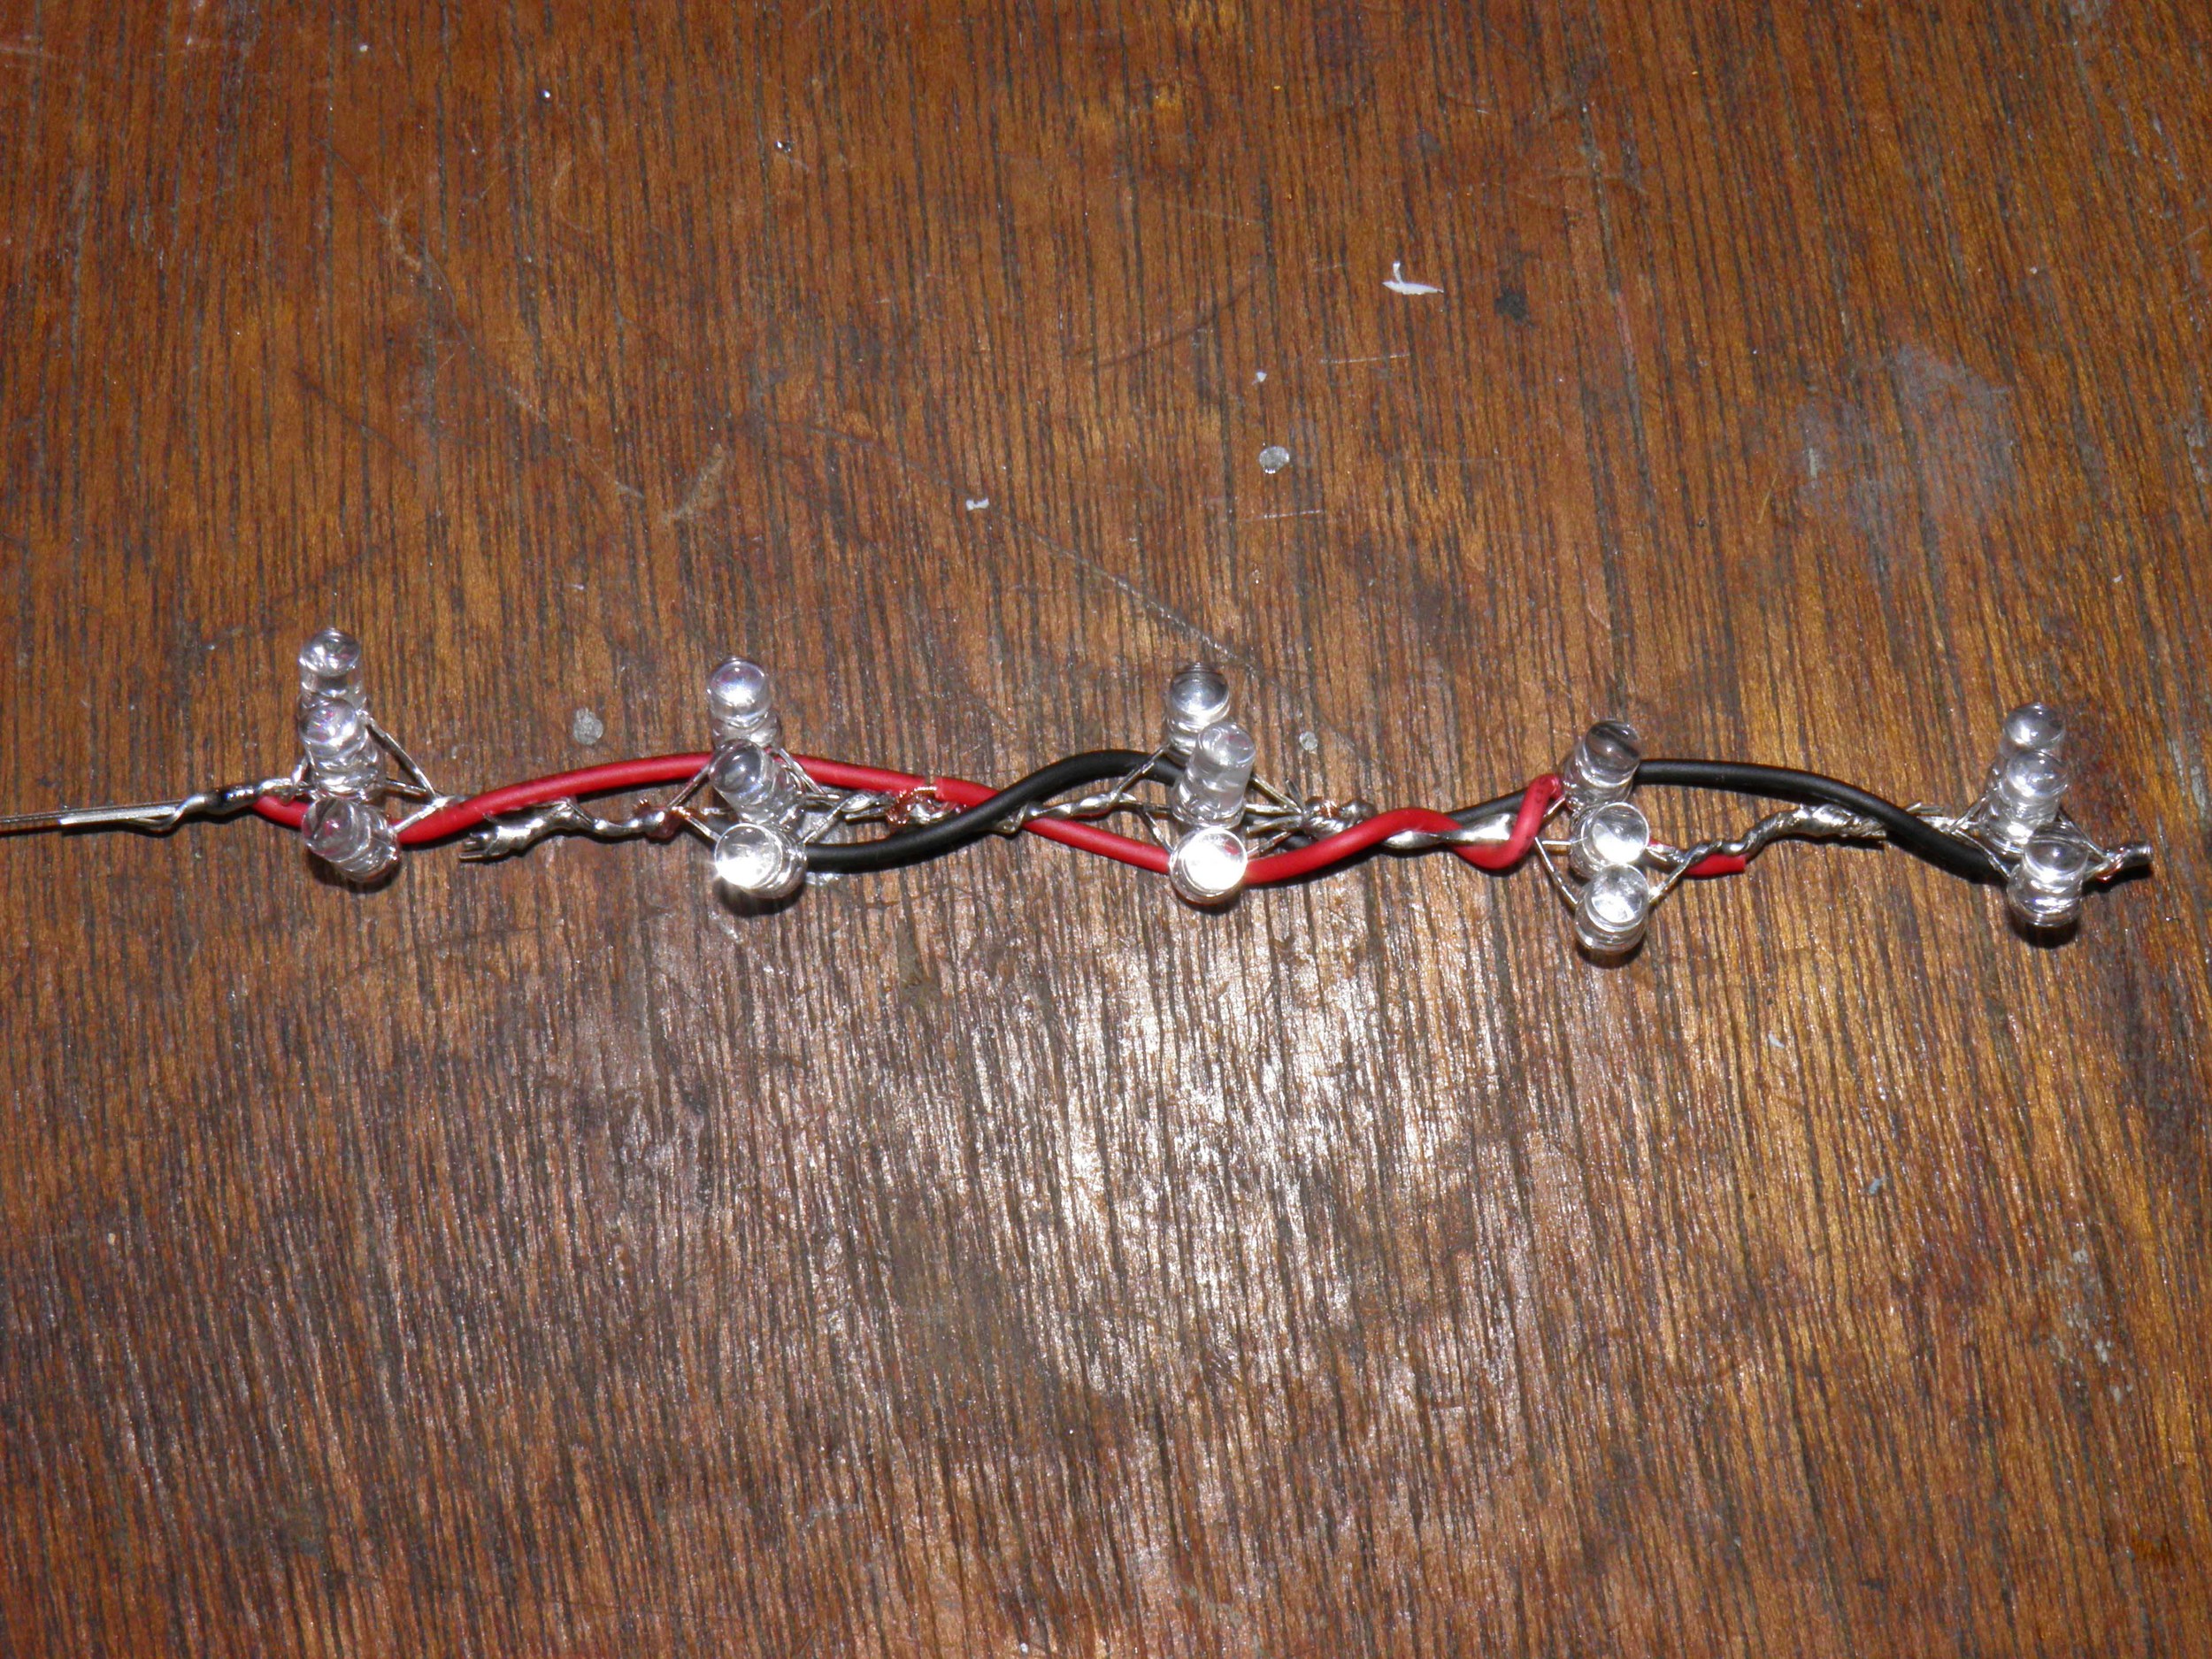 Soldered Up, Wires Soldered and Wrapped Around